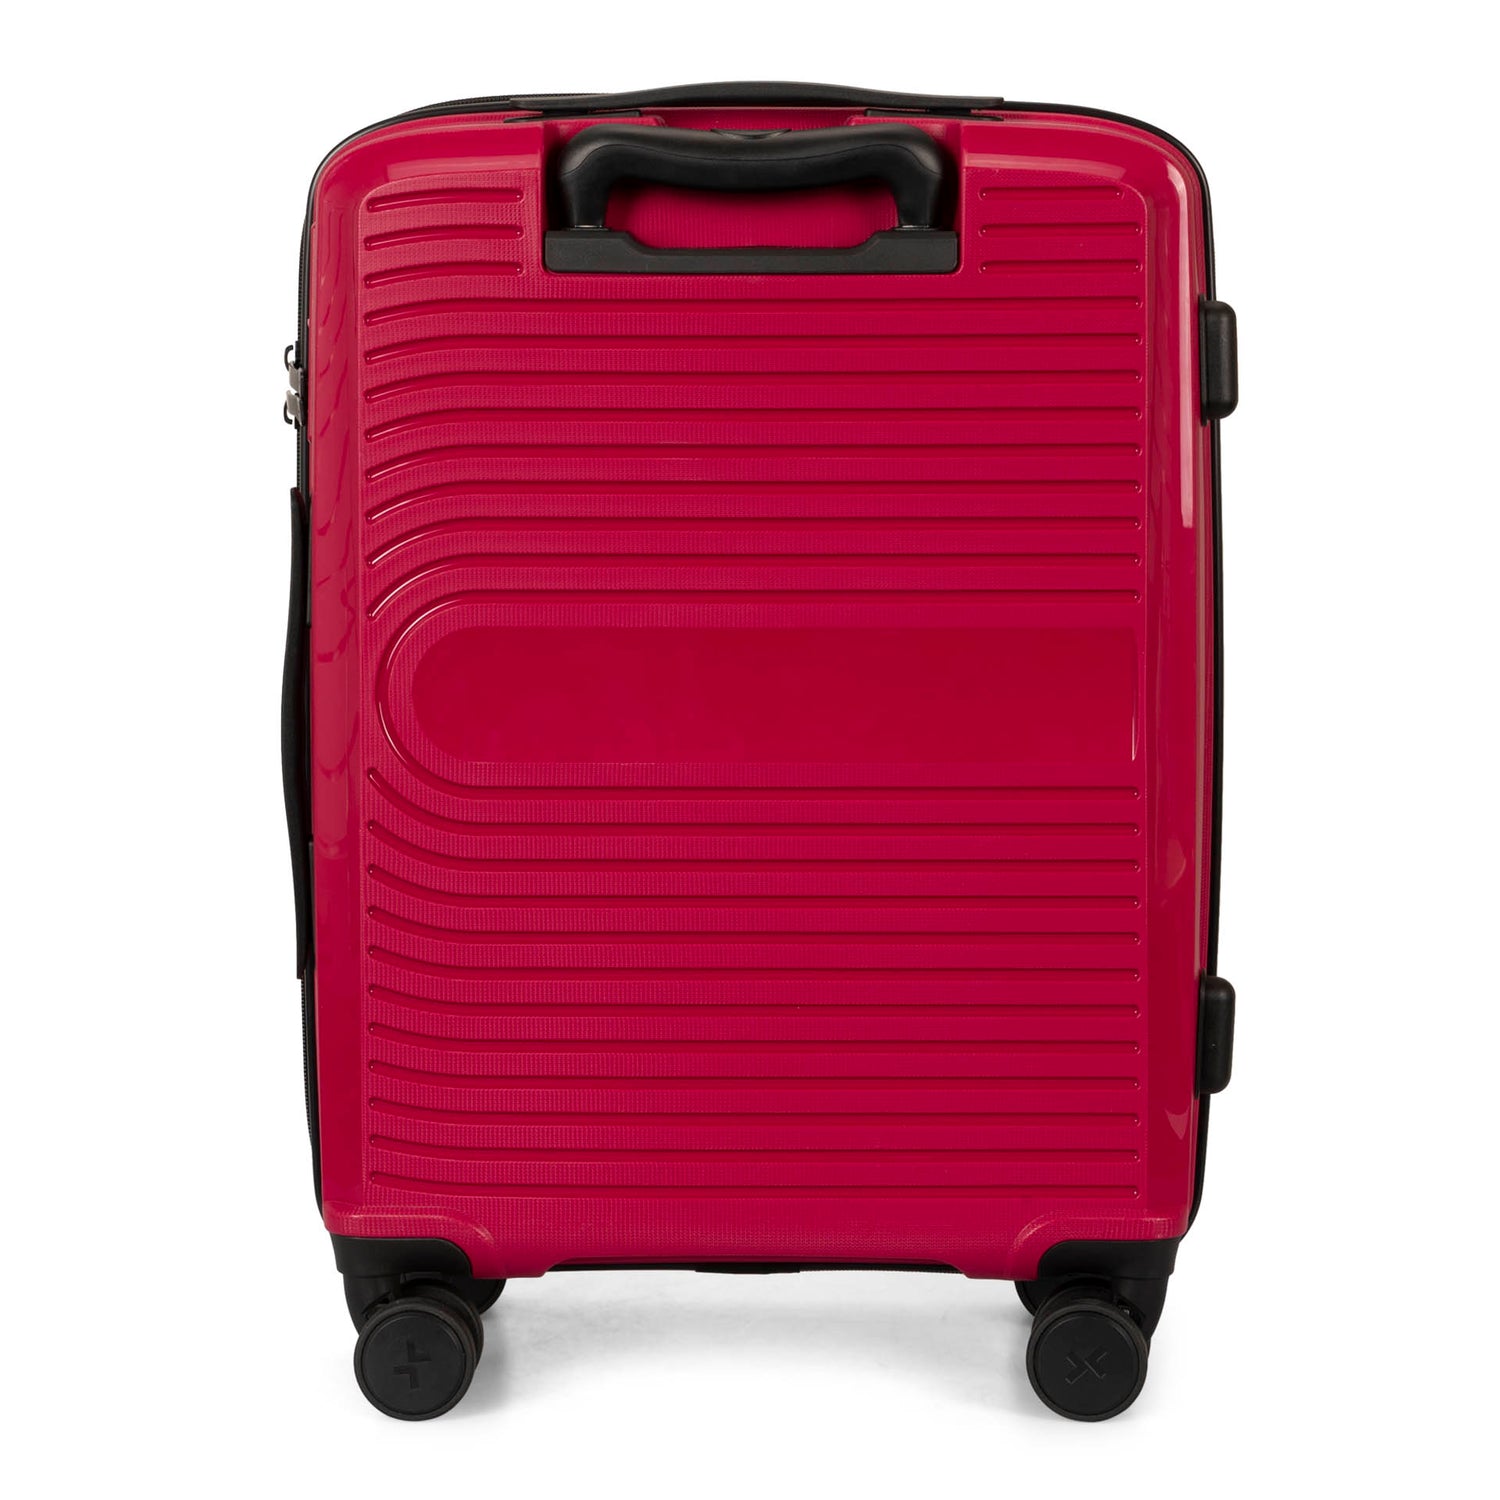 Back side of a red luggage called Dynamo designed by Tracker showing its telescopic handle and lined-pattern shell.